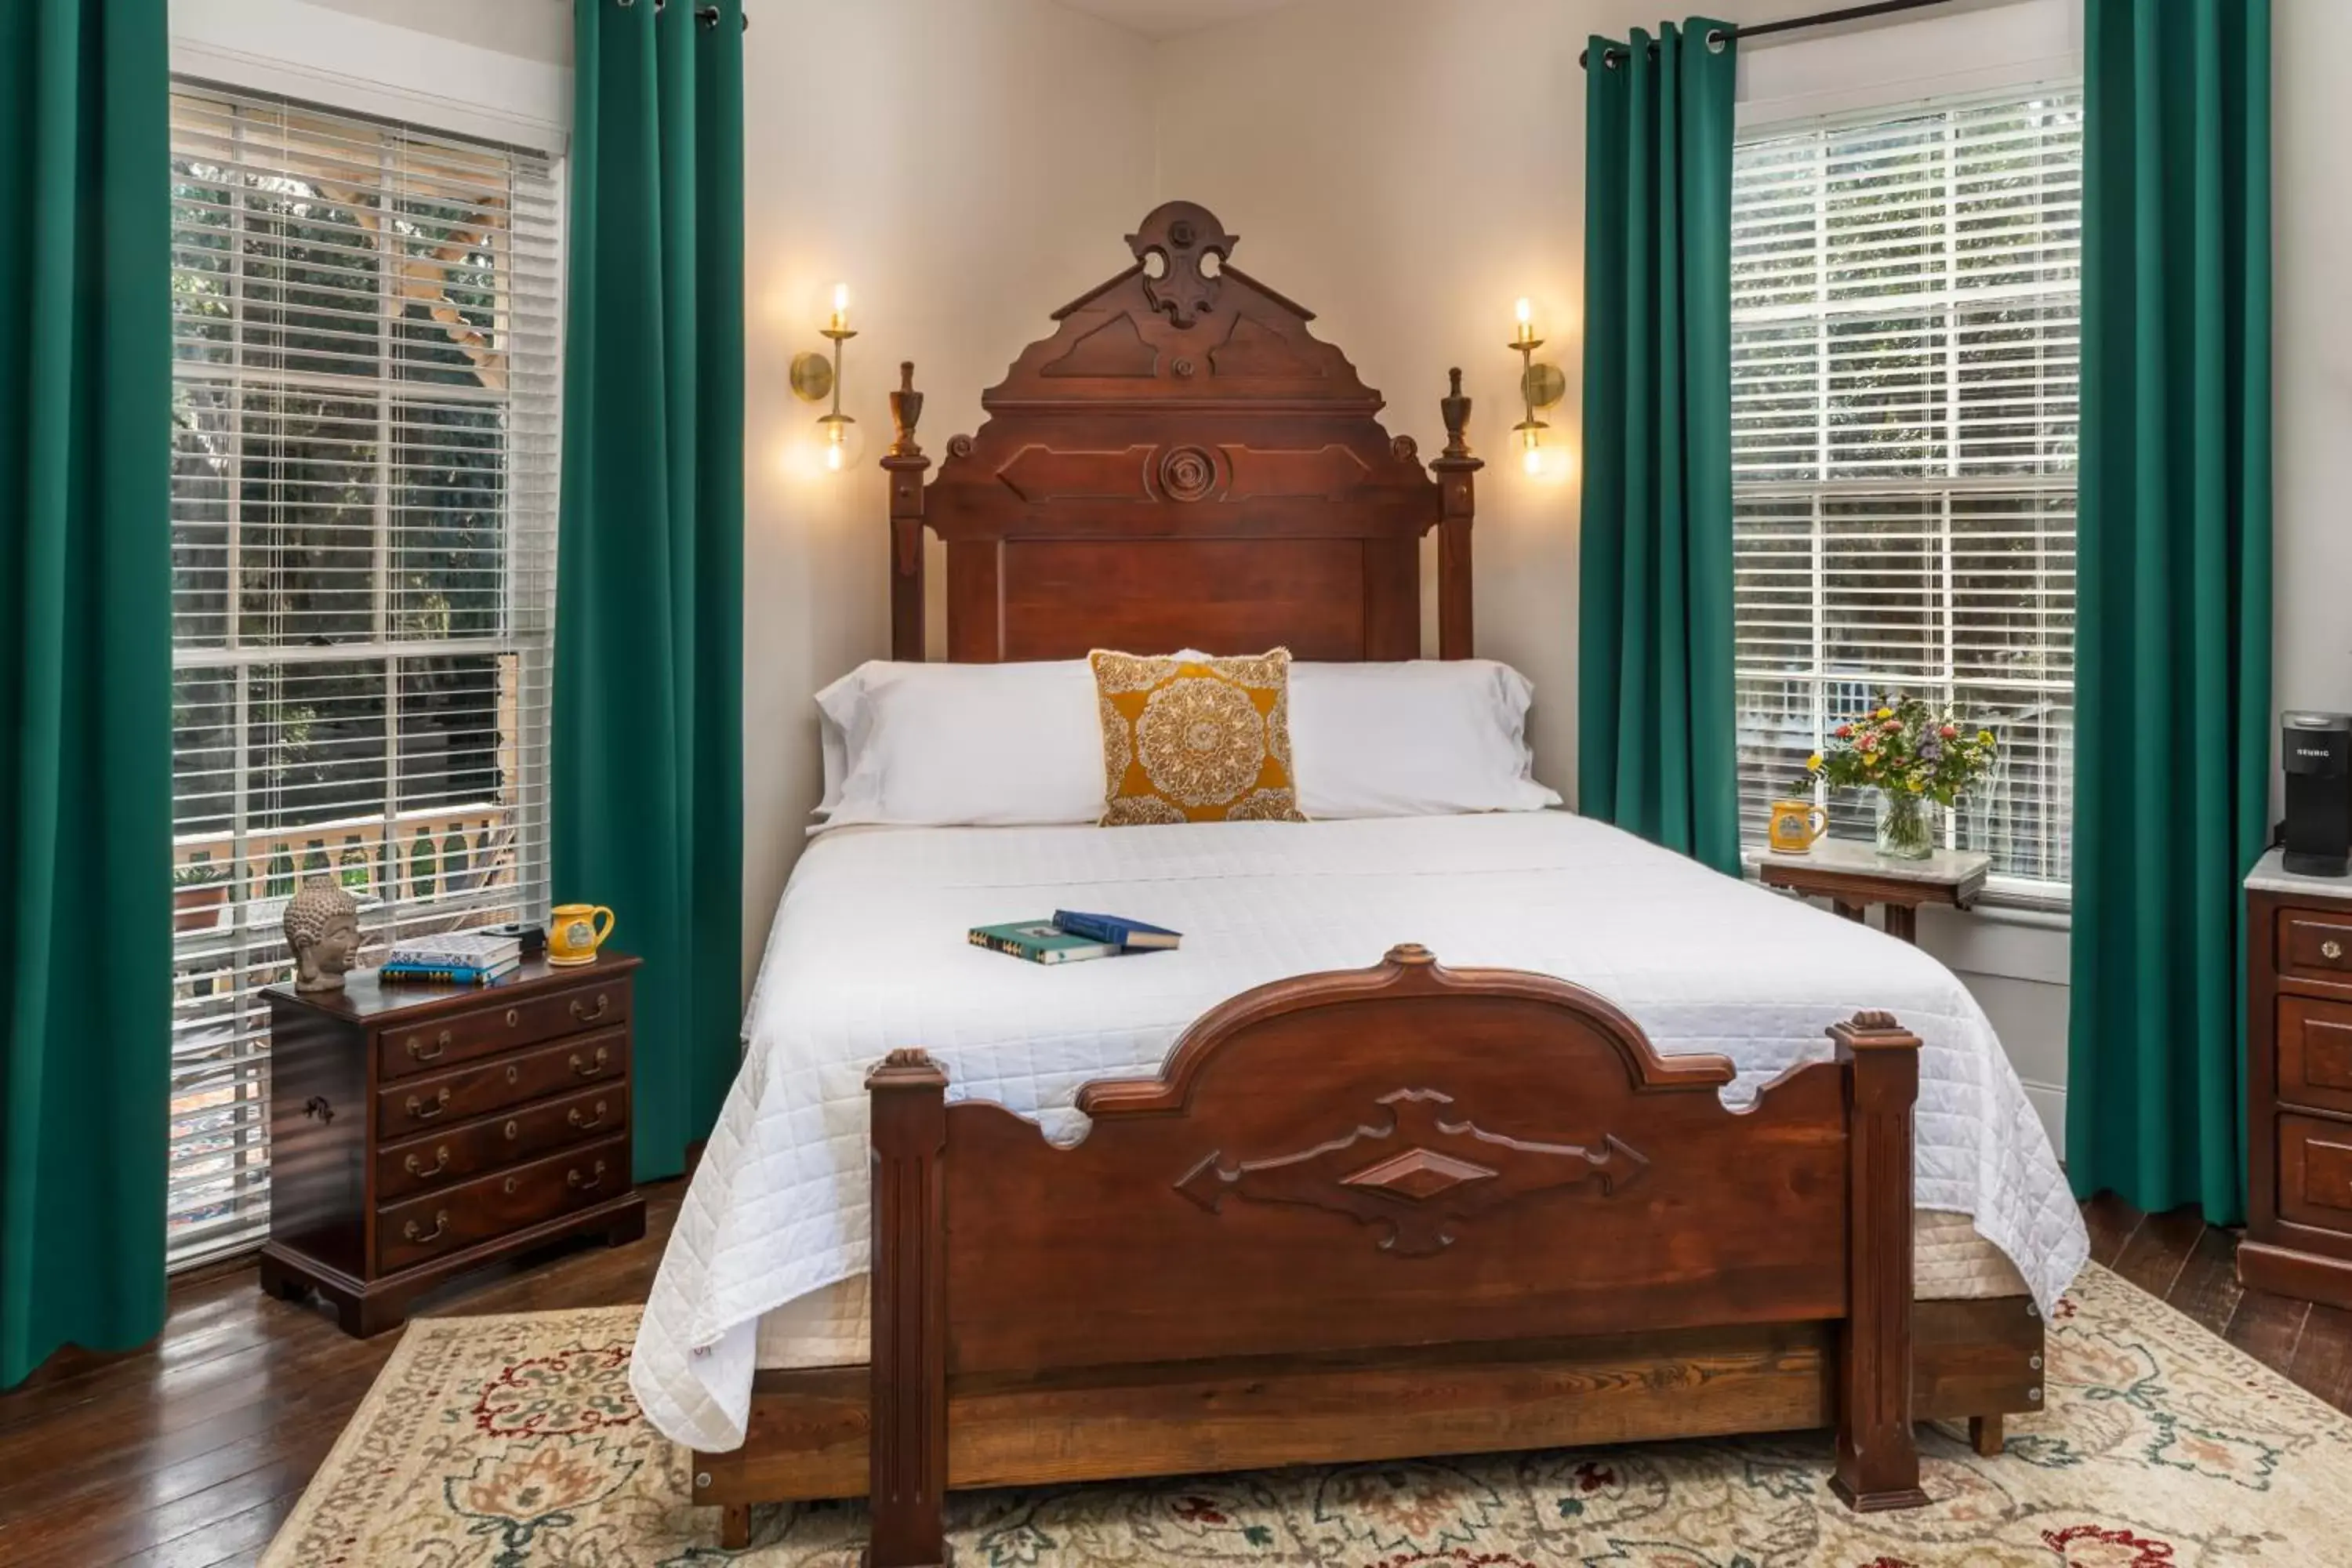 Bed in Amelia Island Williams House